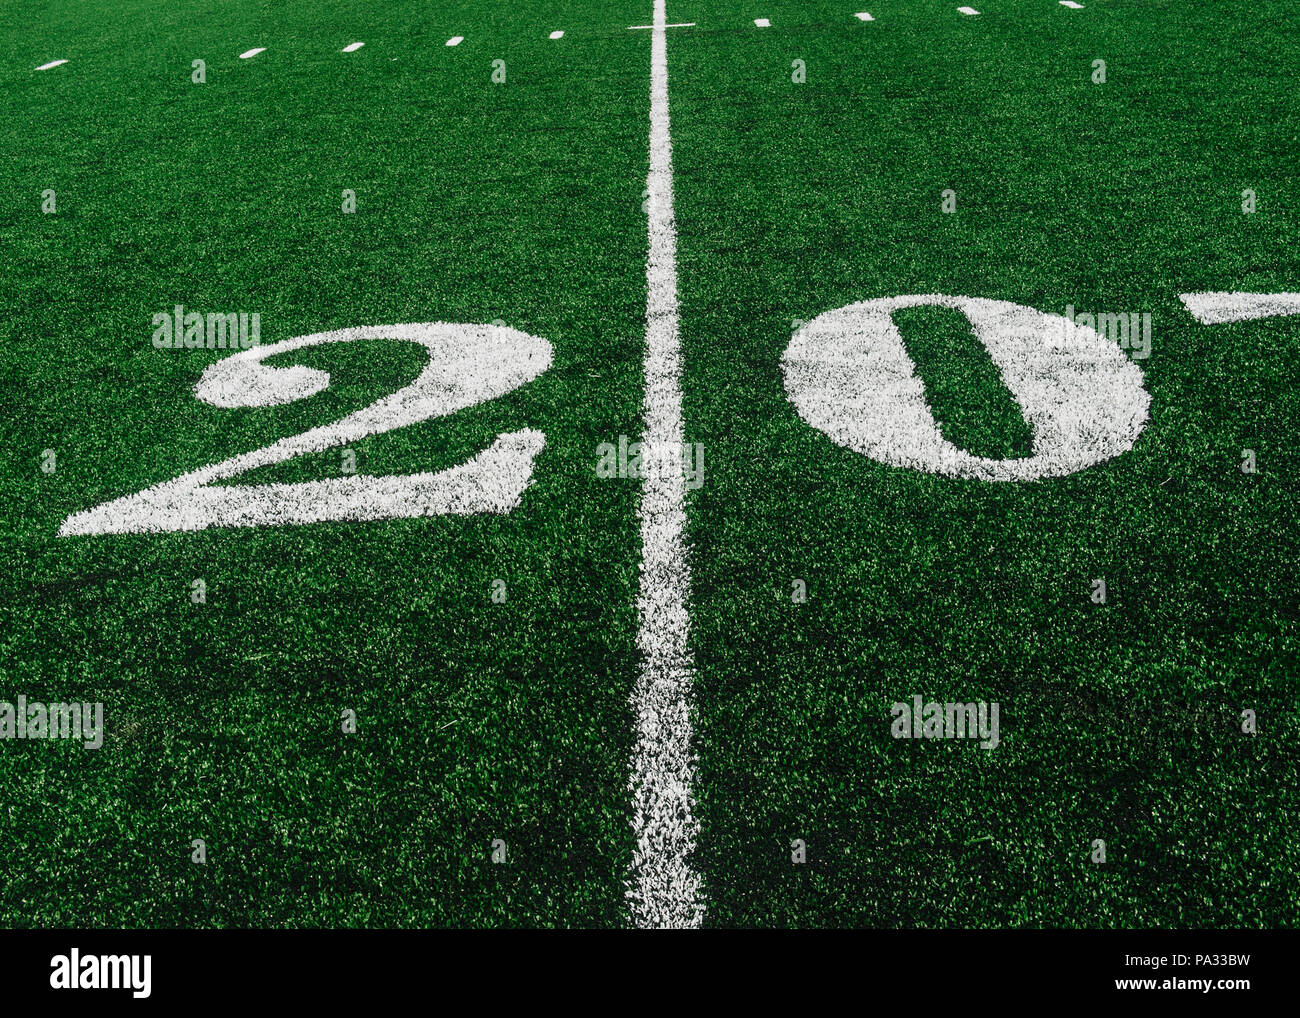 Football Field High Resolution Stock Photography And Images Alamy